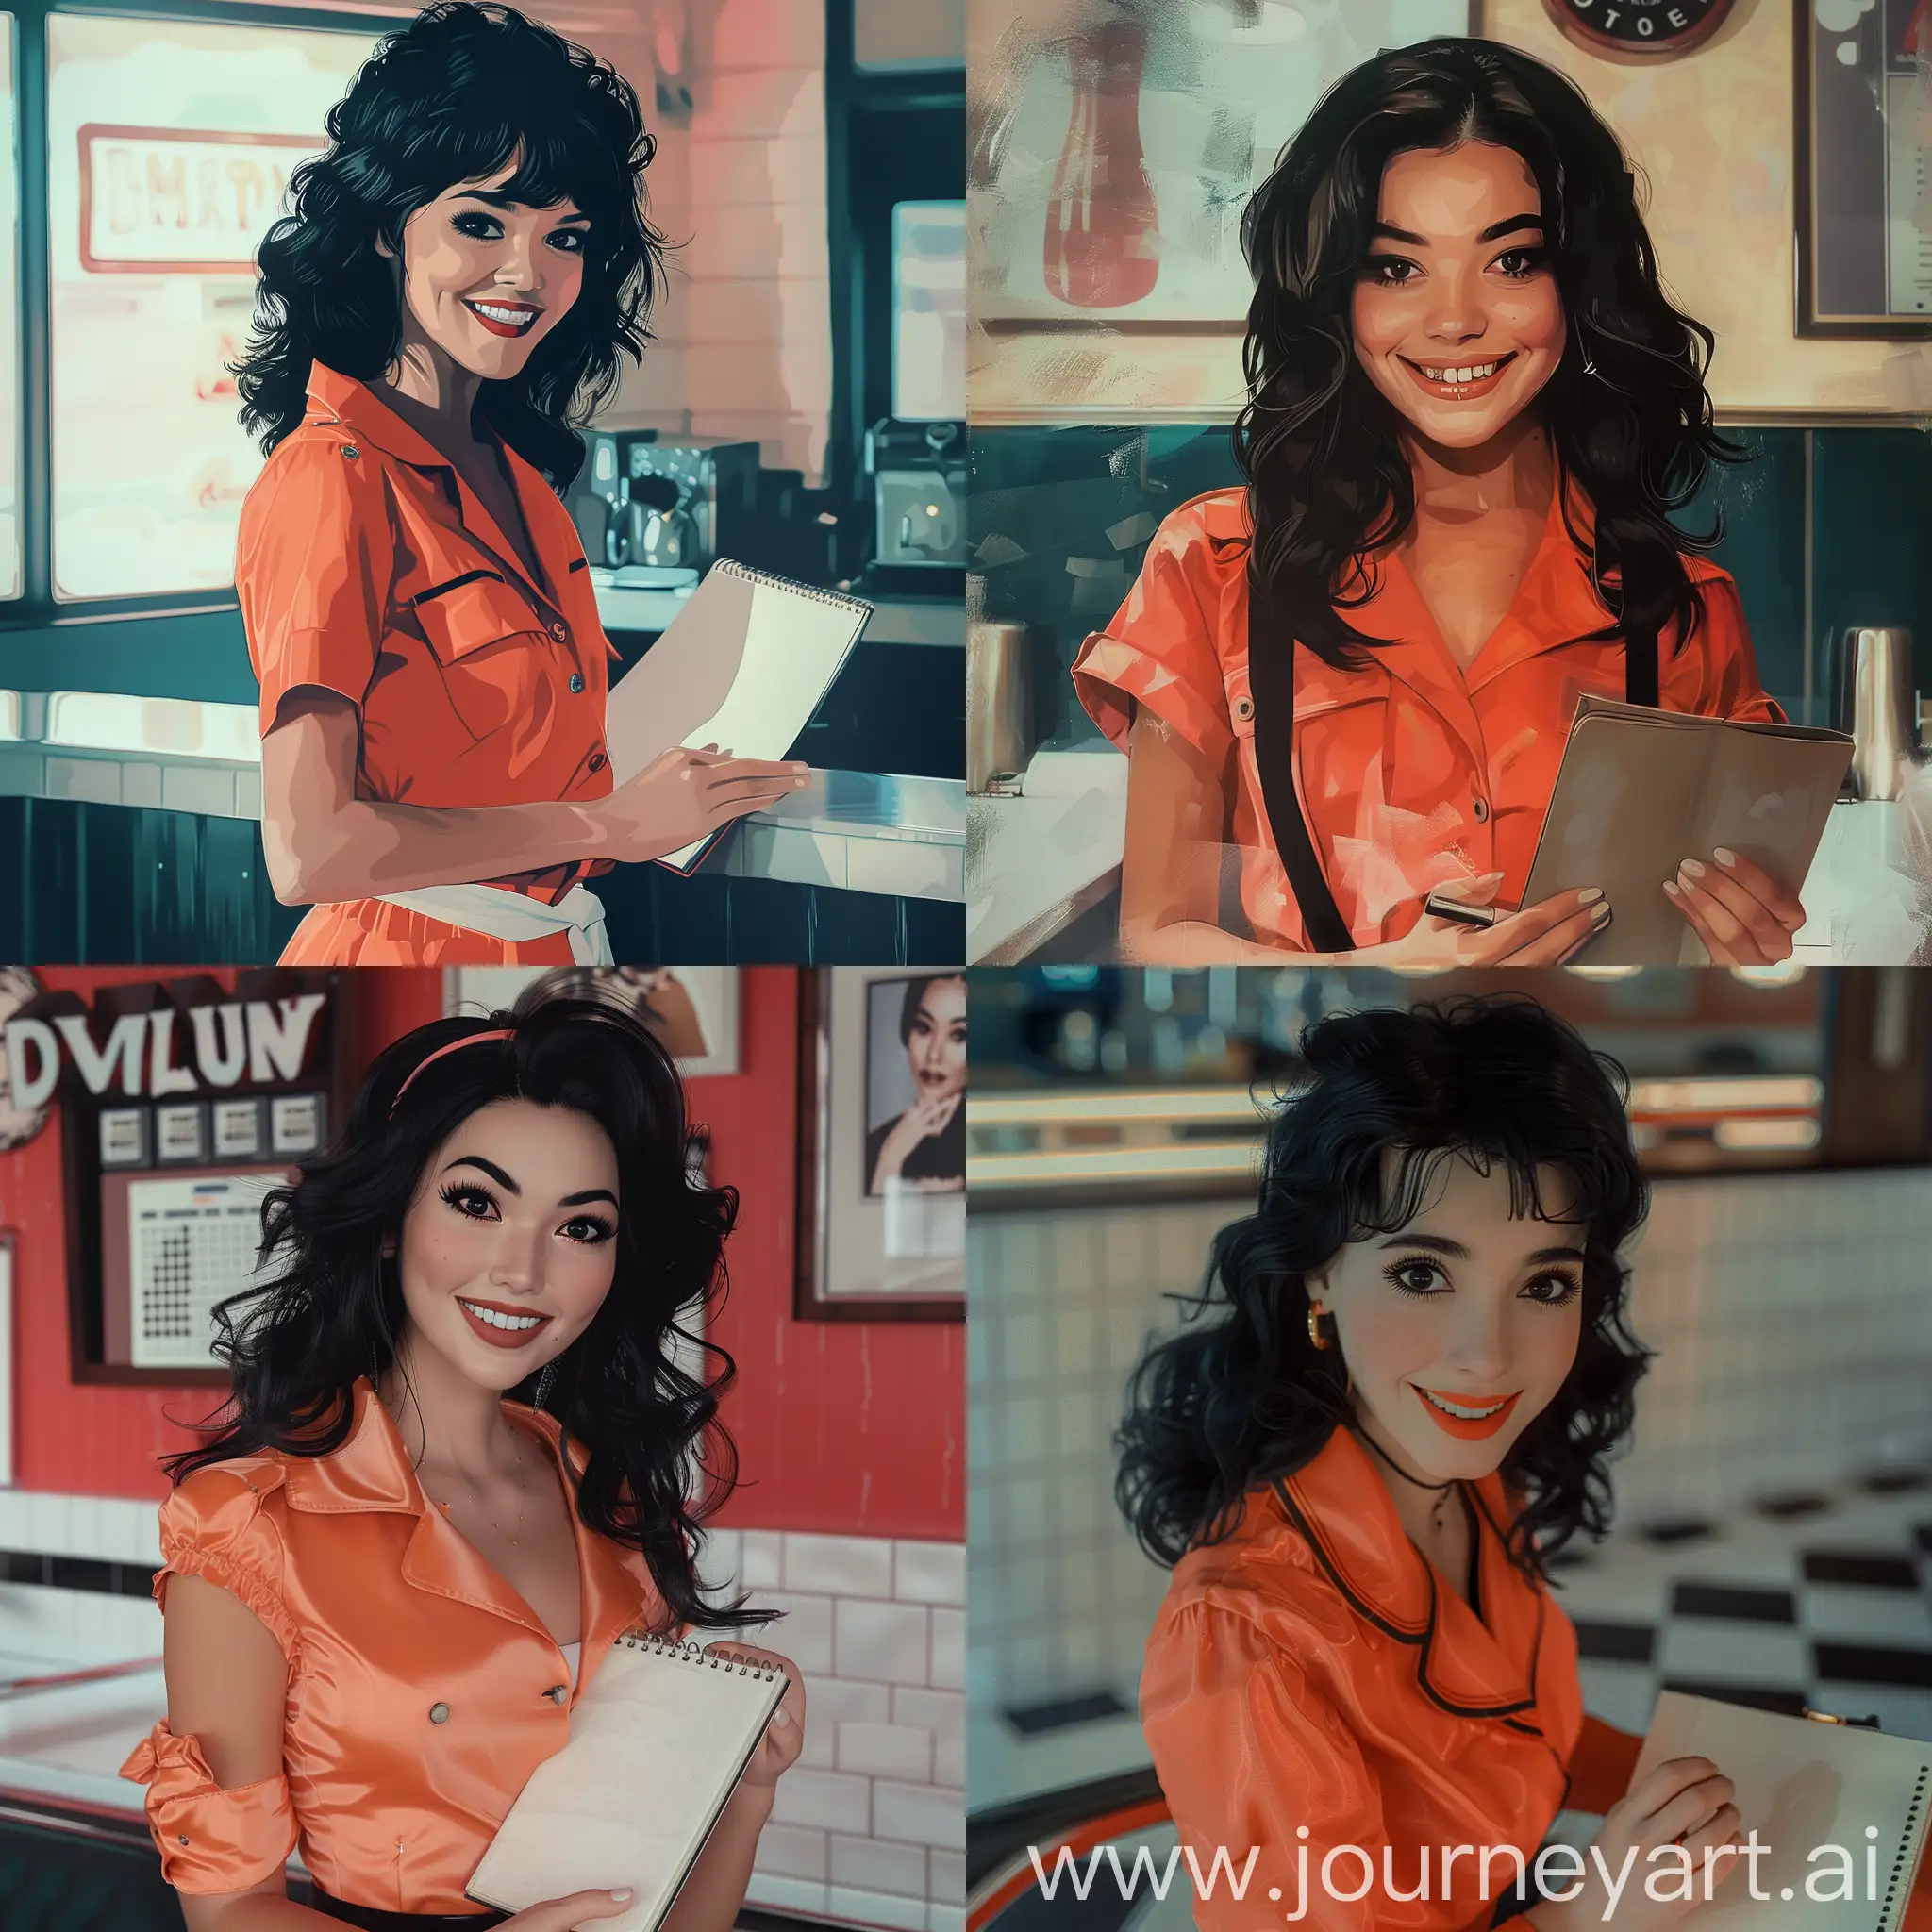 An 80s sexy waitress serving you, smile, from the front, black wavy hair, black eyes, white skin, salmon-colored waitress outfit, 80s style, 80s look, 80s effect, 80s clothes and hair, diner background, retro, indie, vintage, classic, old, nostalgic, grounge, holding a notebook, real, realistic, photorealistic, VHS photo effect, sexy, glamour, luxury, fame, love 